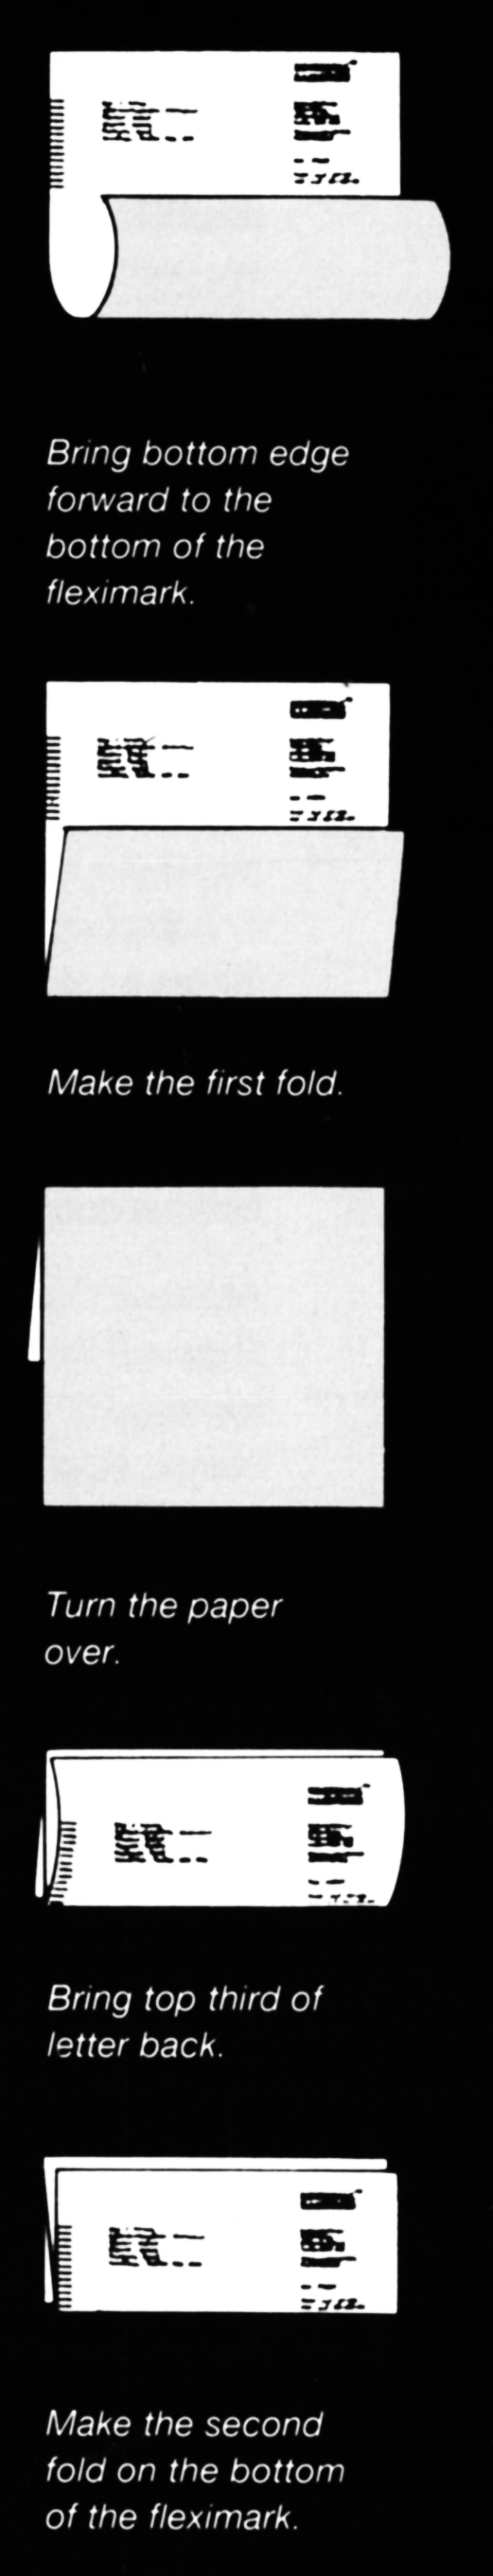 How to fold